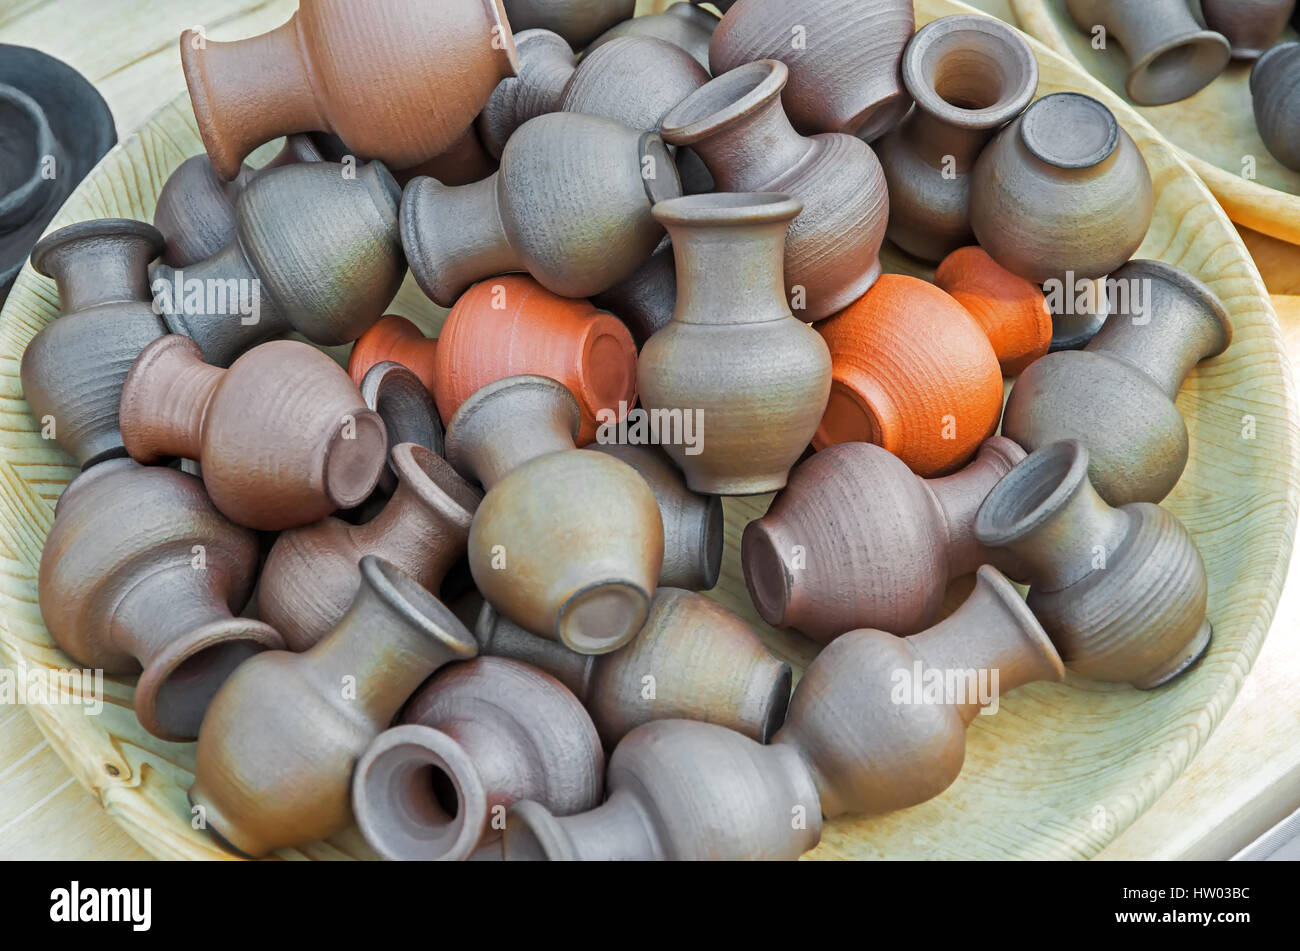 Wooden bowl with a handful of small clay pots and jugs Stock Photo